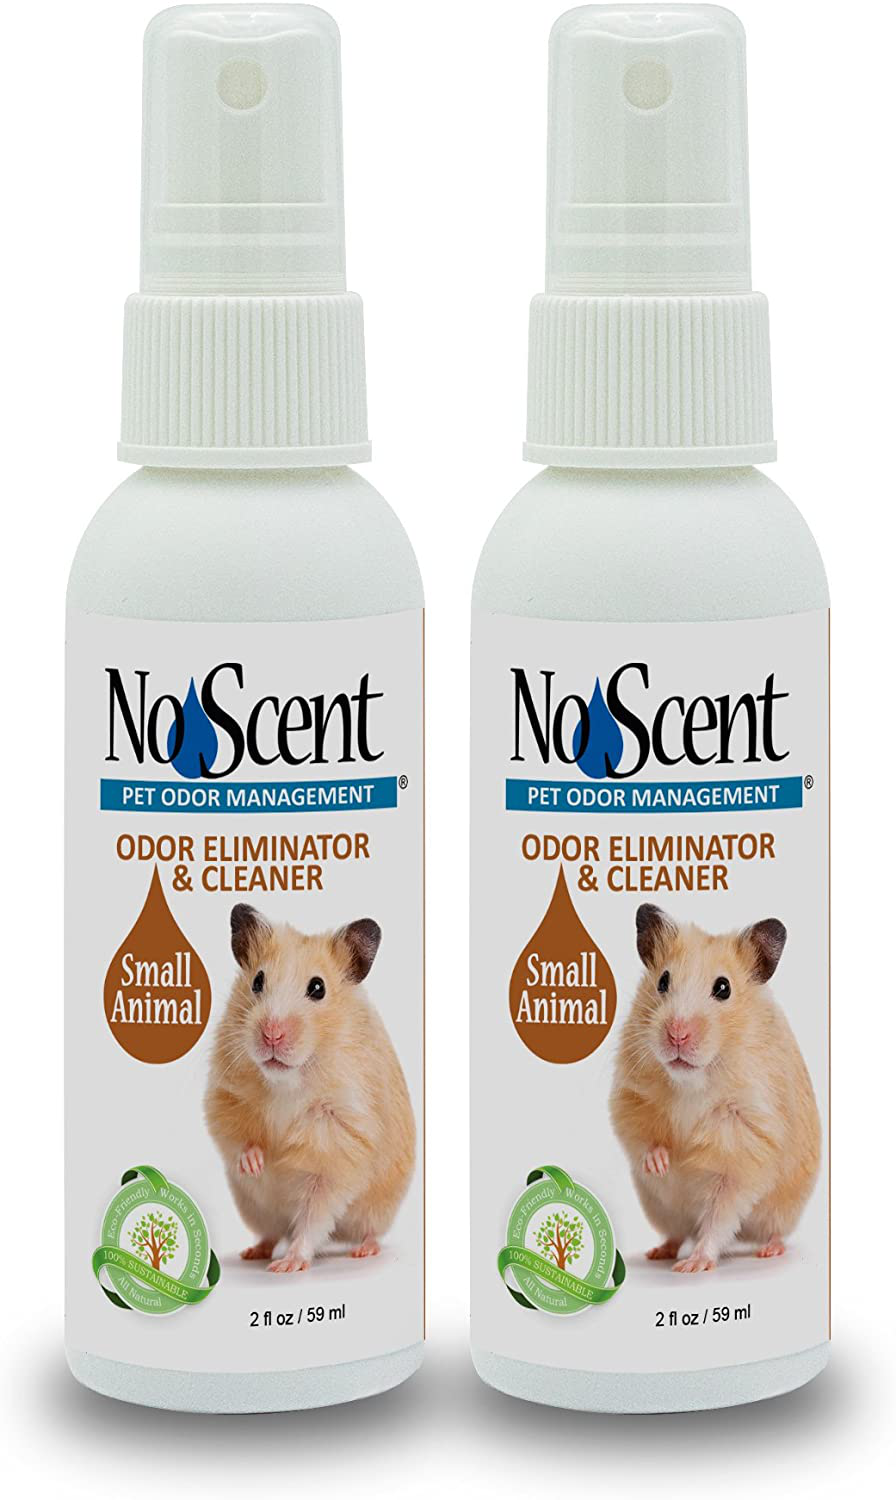 No Scent Small Animal - Professional Pet Waste Odor Eliminator & Cleaner - Safe All Natural Probiotic & Enzyme Formula Smell Remover for Hutches Tanks Enclosures Bedding Toys and Surfaces